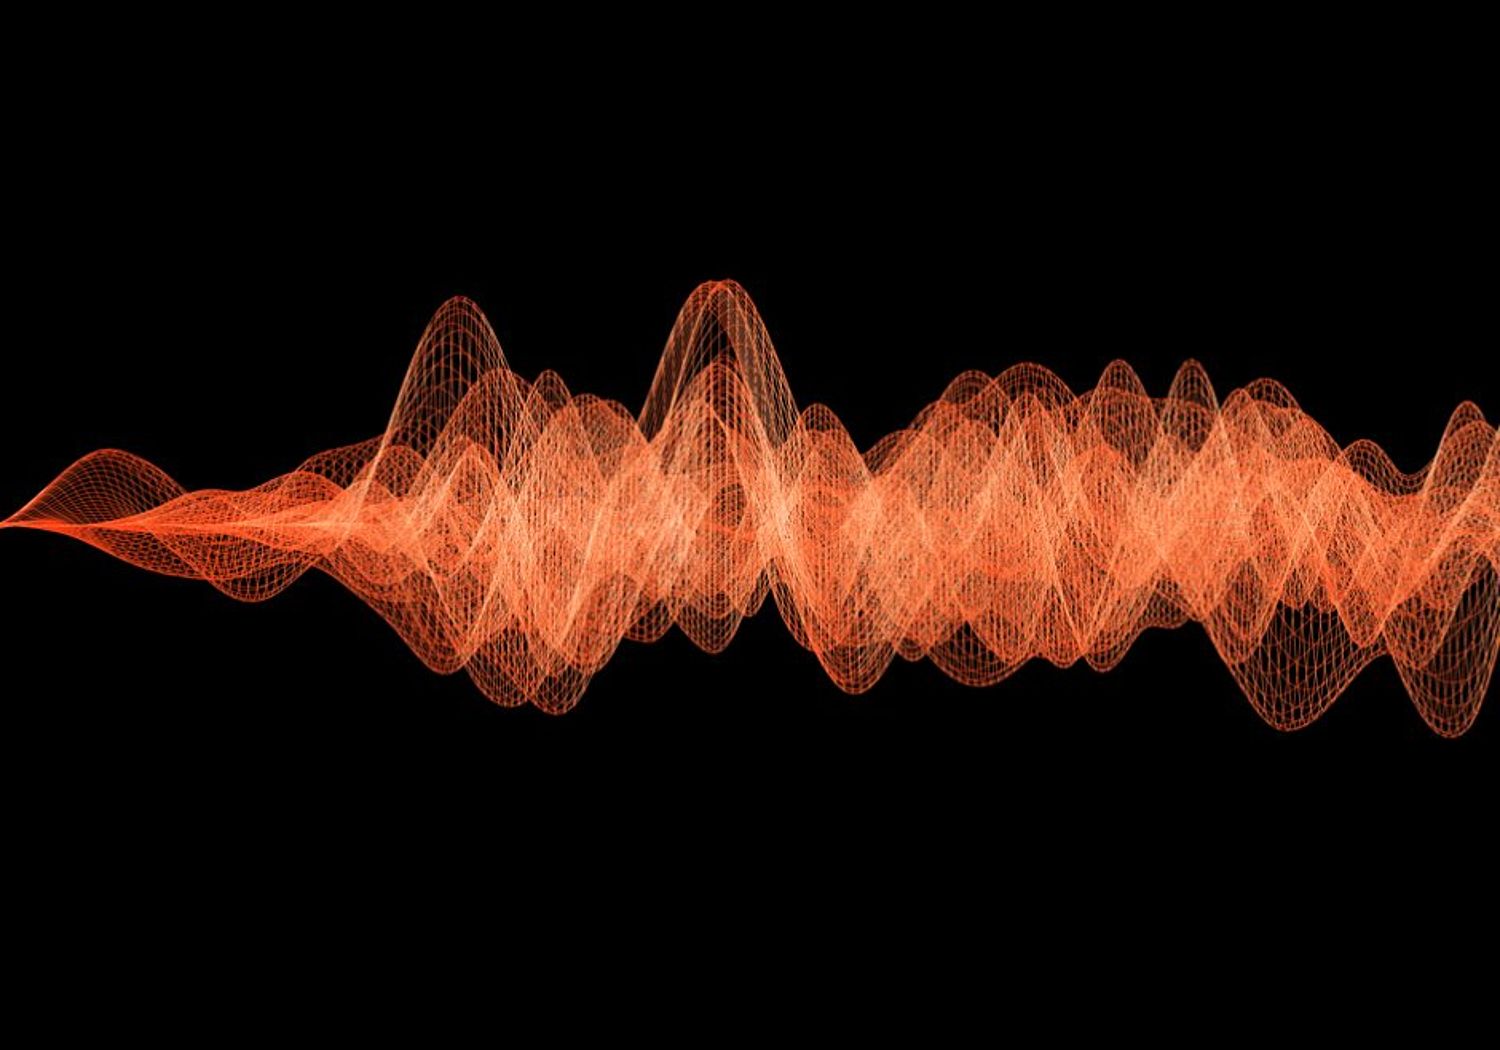 Image of overlapping waves of different frequencies